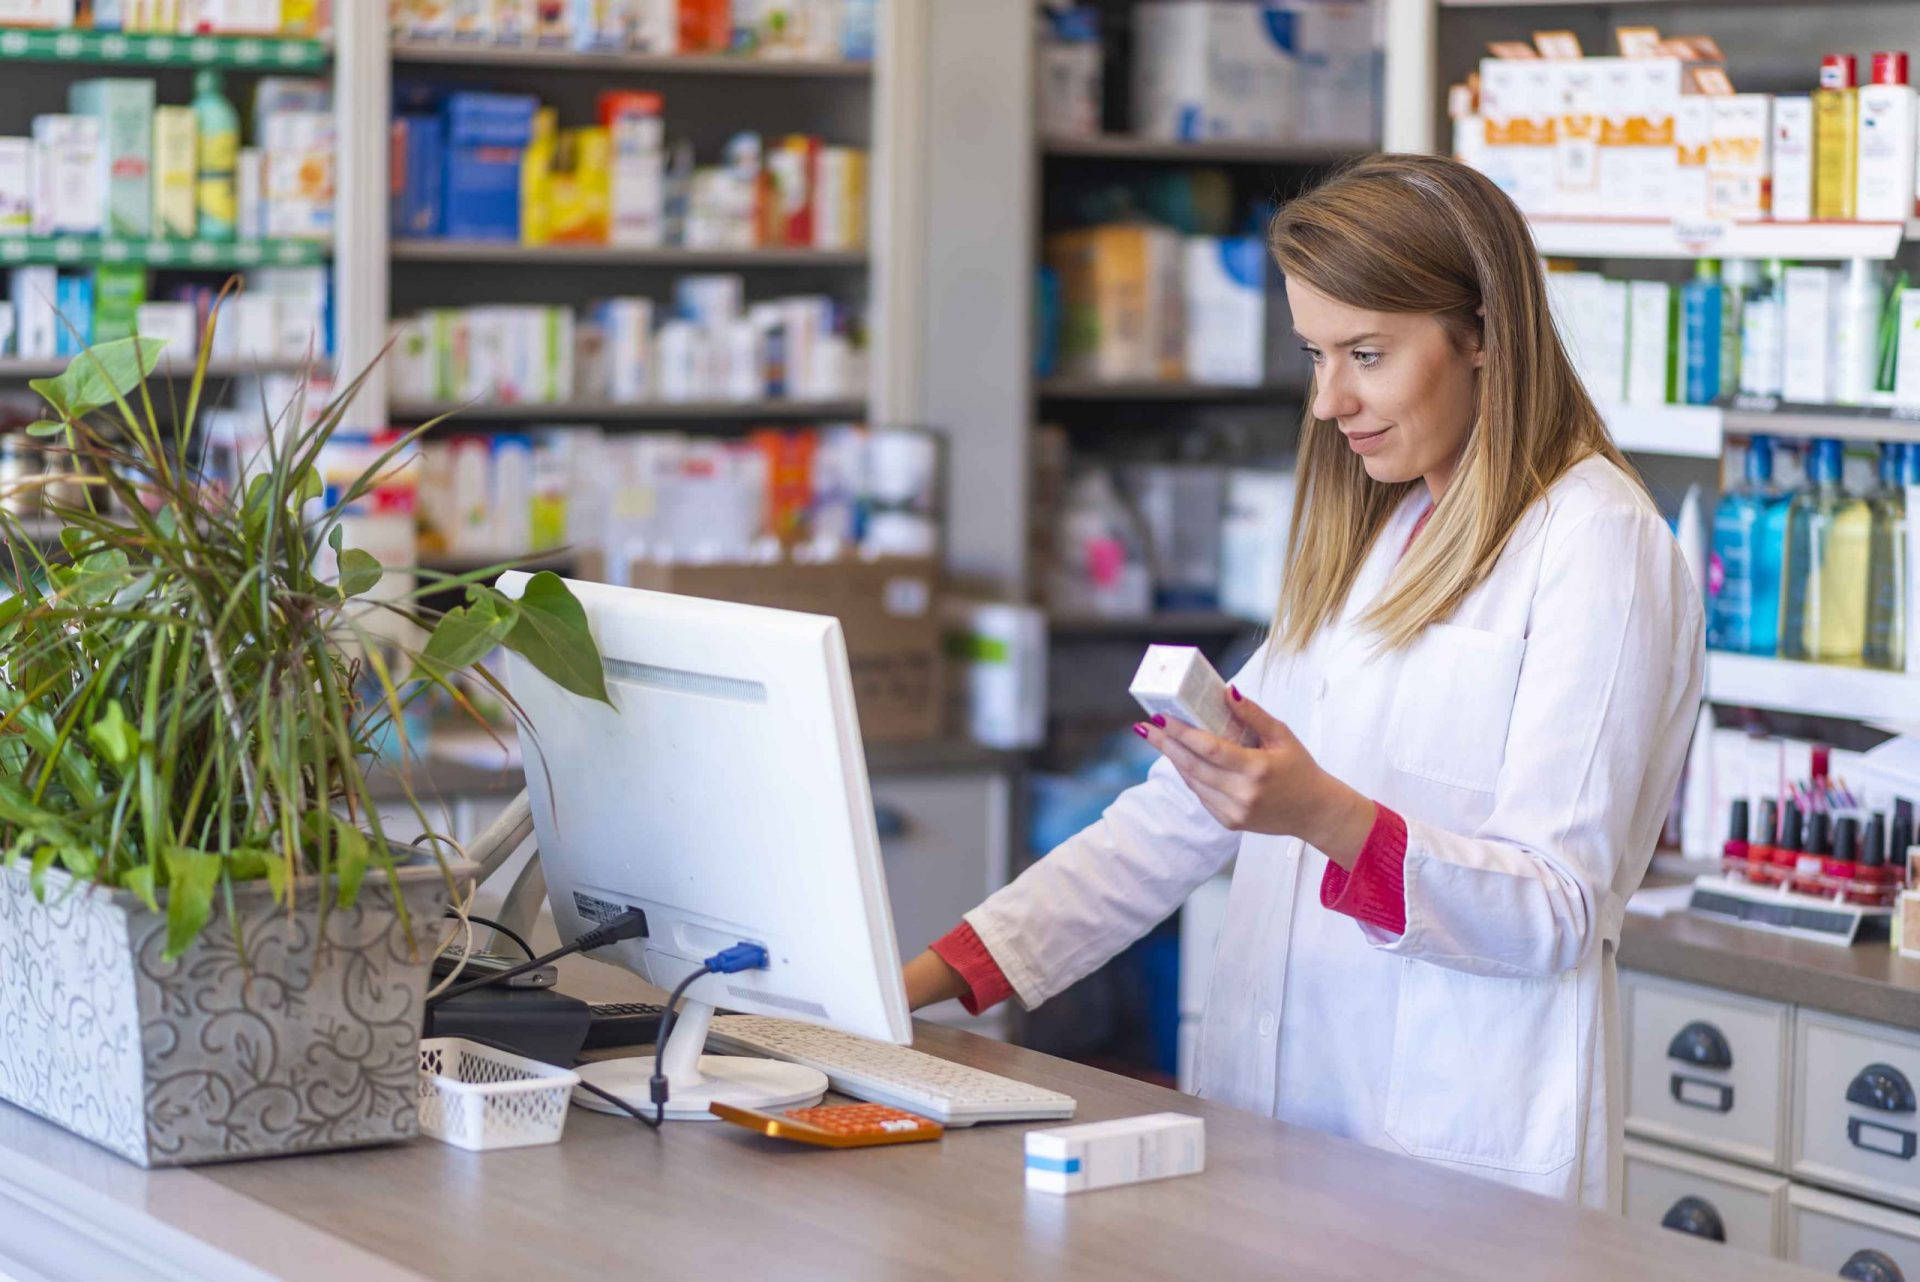 A Diligent Female Pharmacist Perusing Medication In A Pharmacy